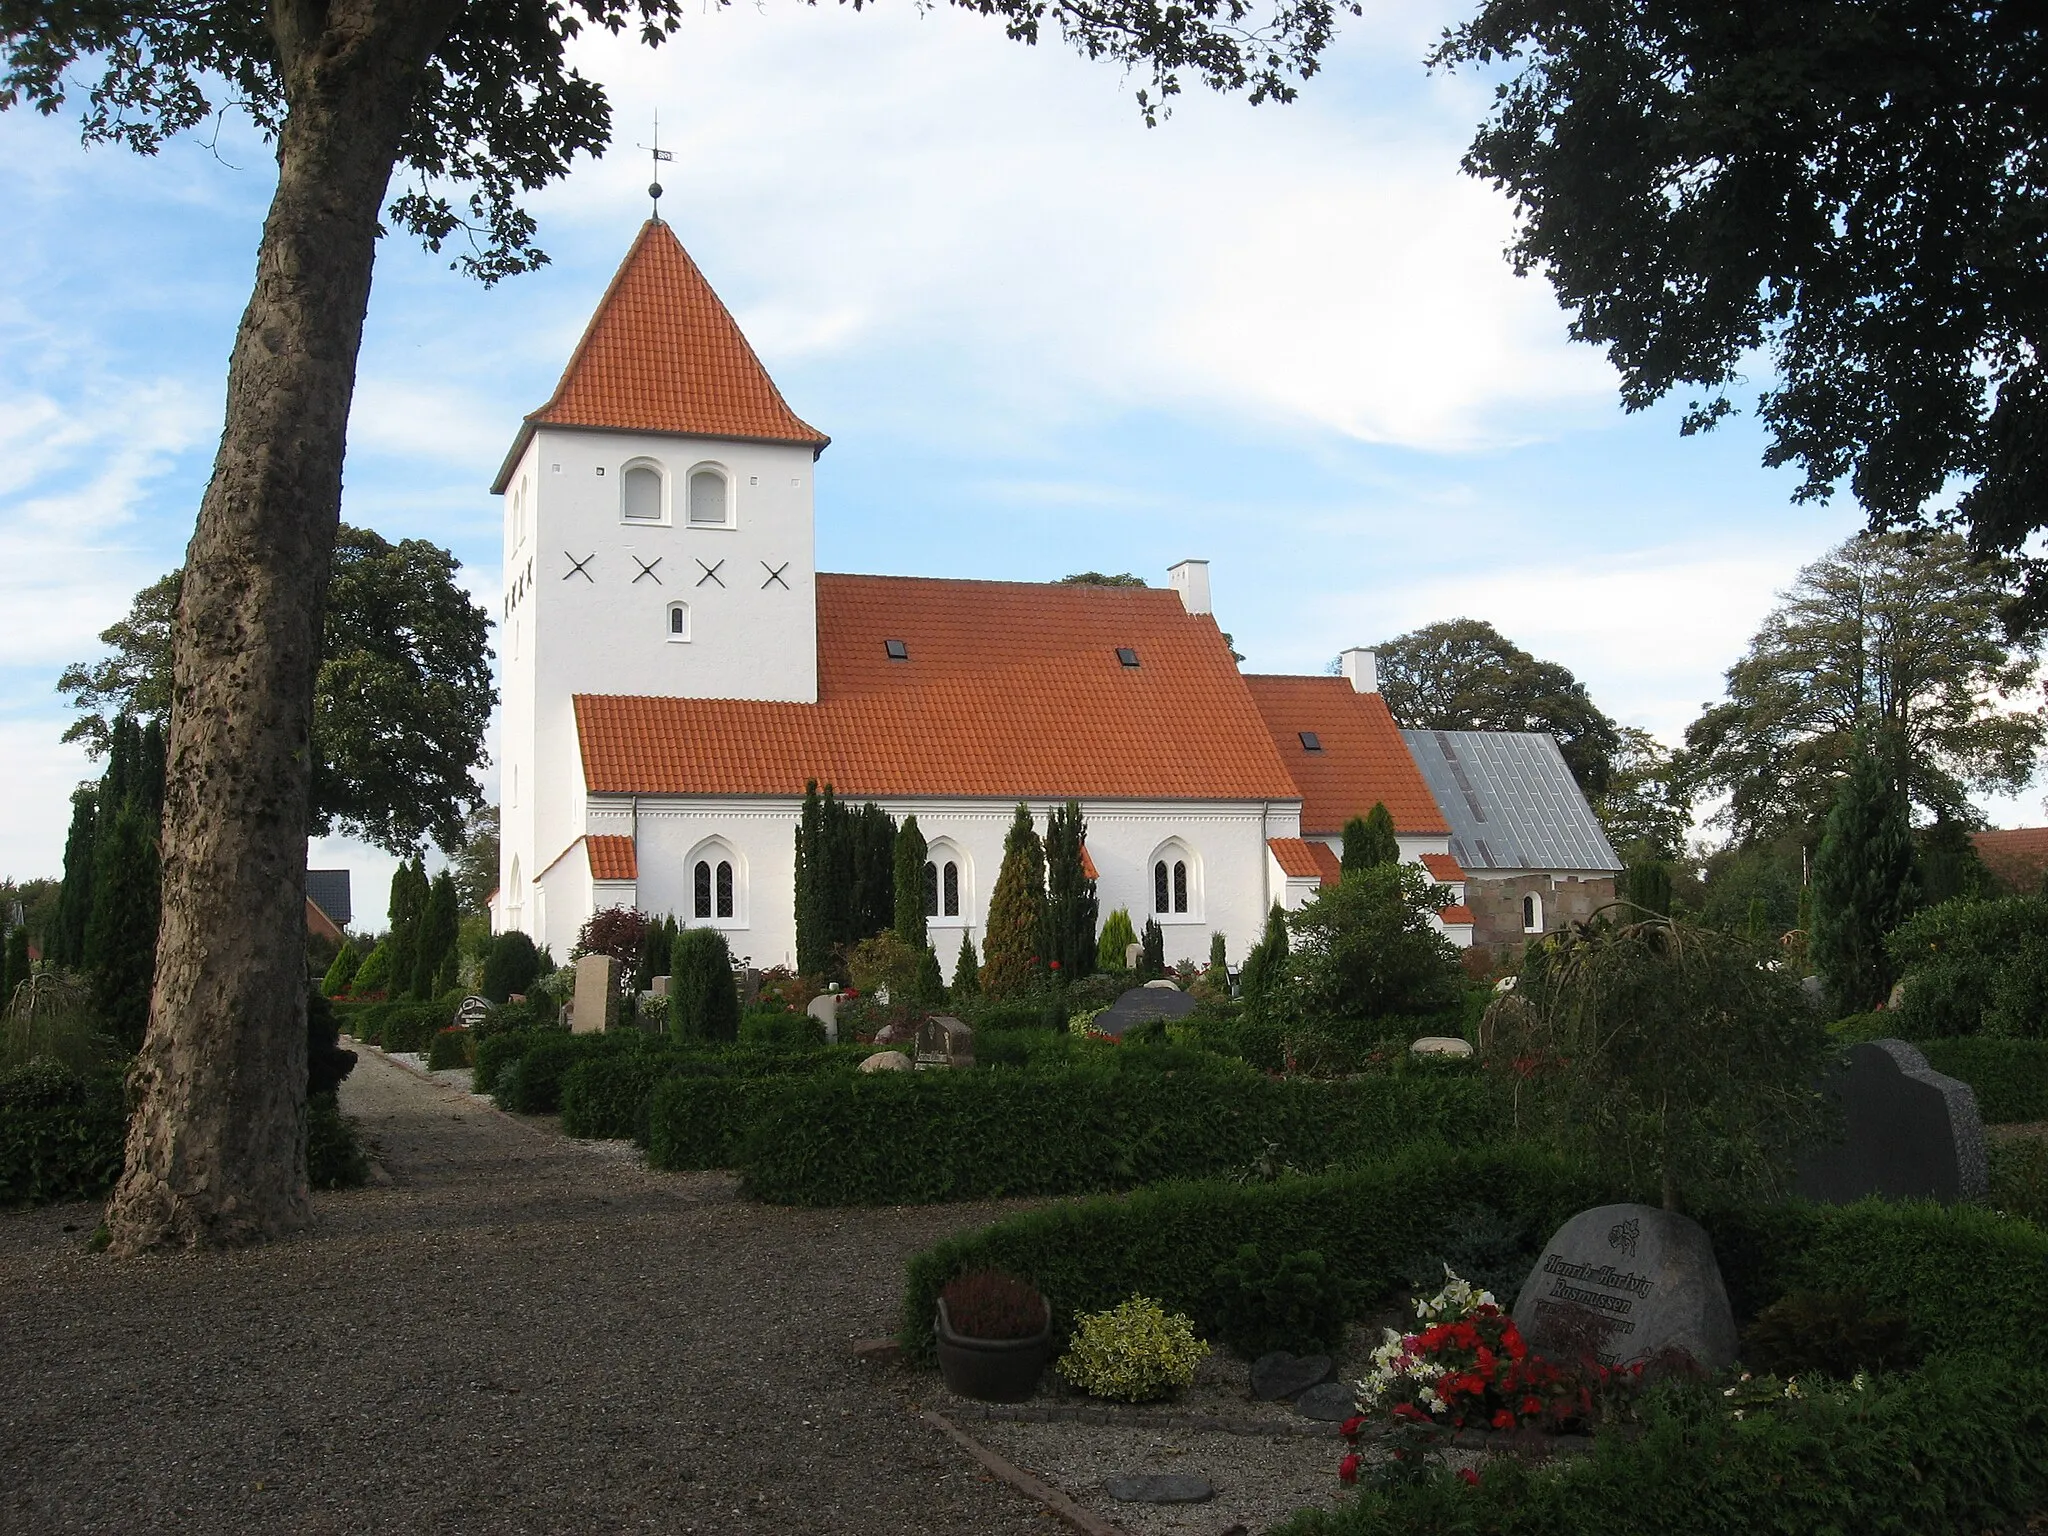 Photo showing: The church of Hejnsvig in the Diocese of Ribe, Denmark